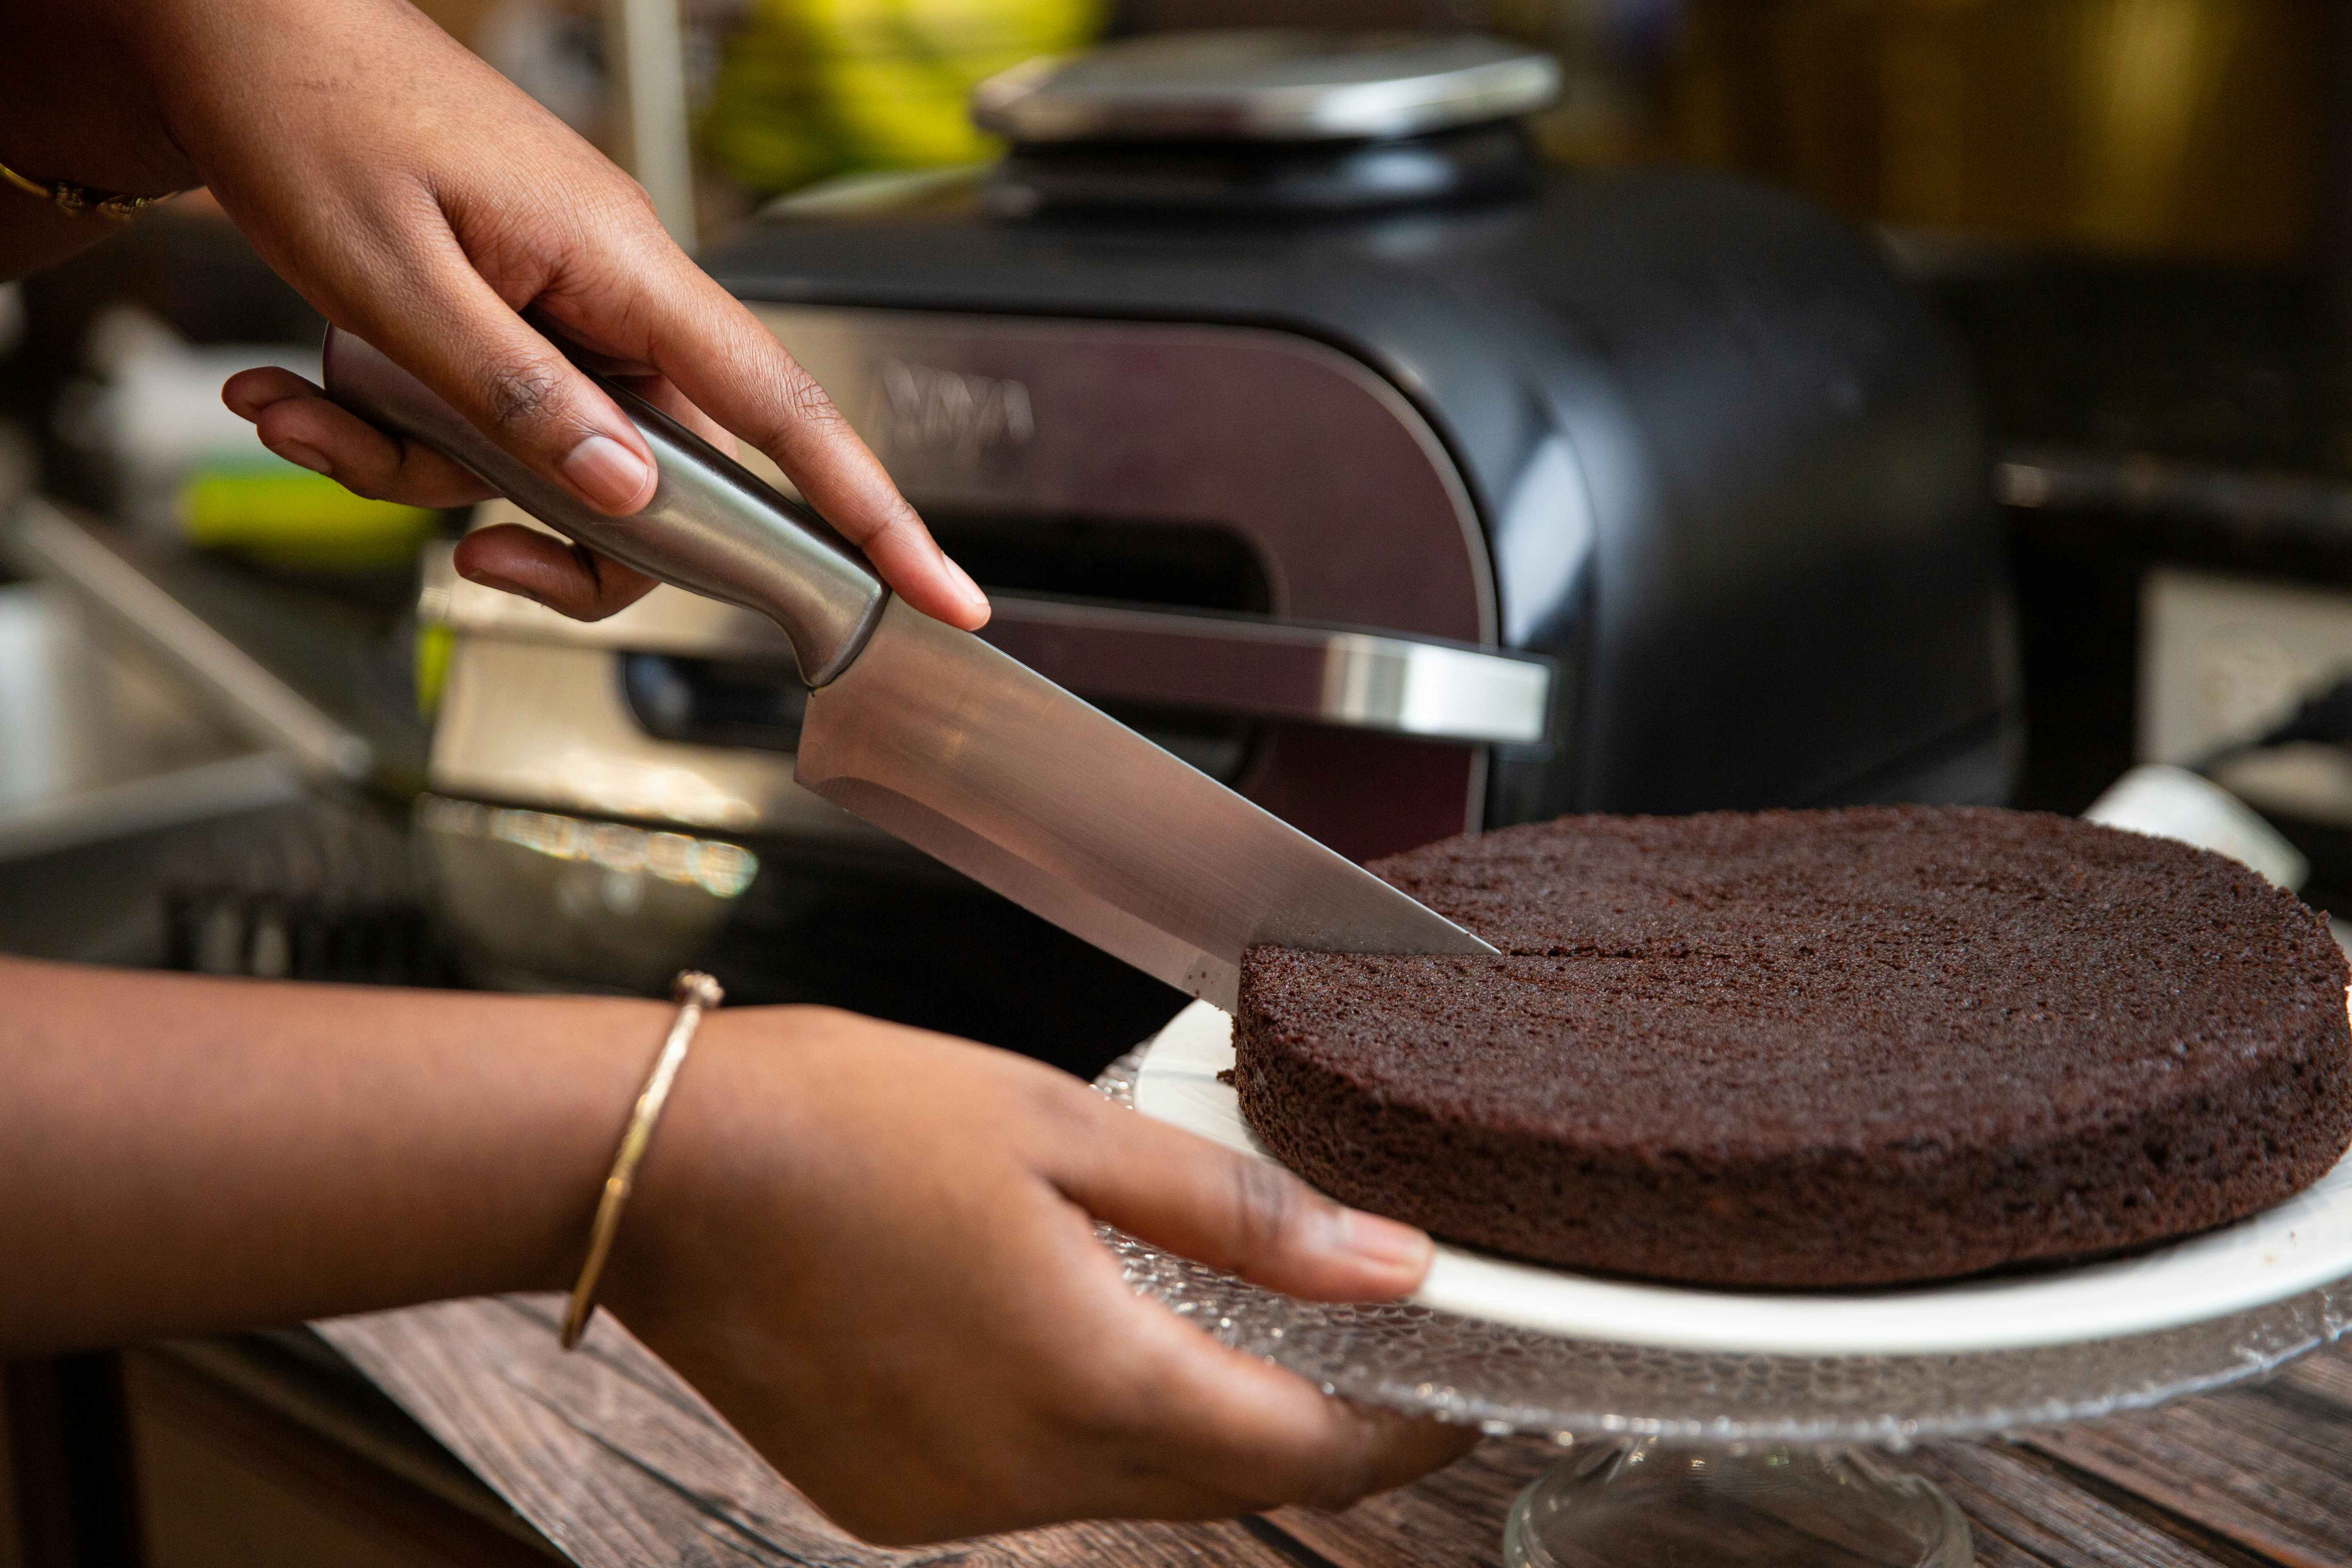 Hand cutting a chocolate cake in front of a silver and black air fryer